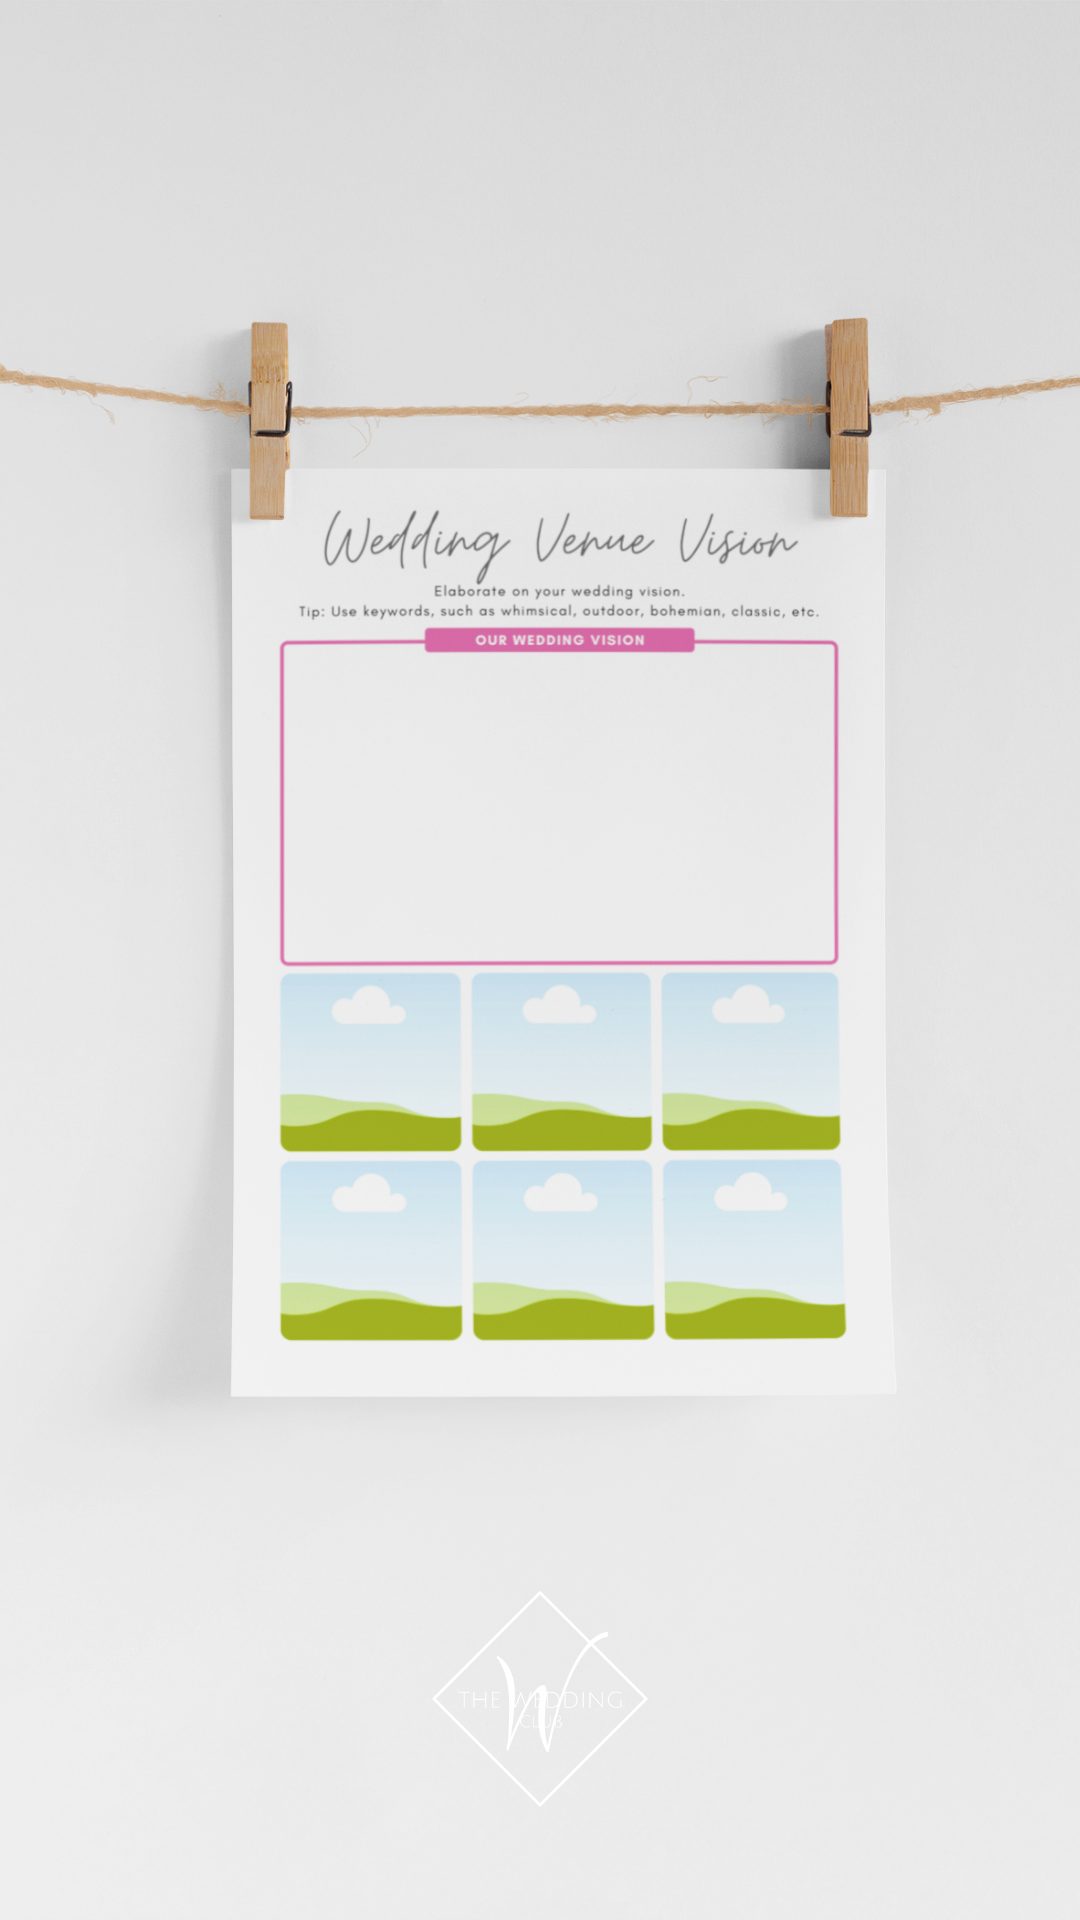 How to start searching for a wedding venue - The Wedding Club - 2.png